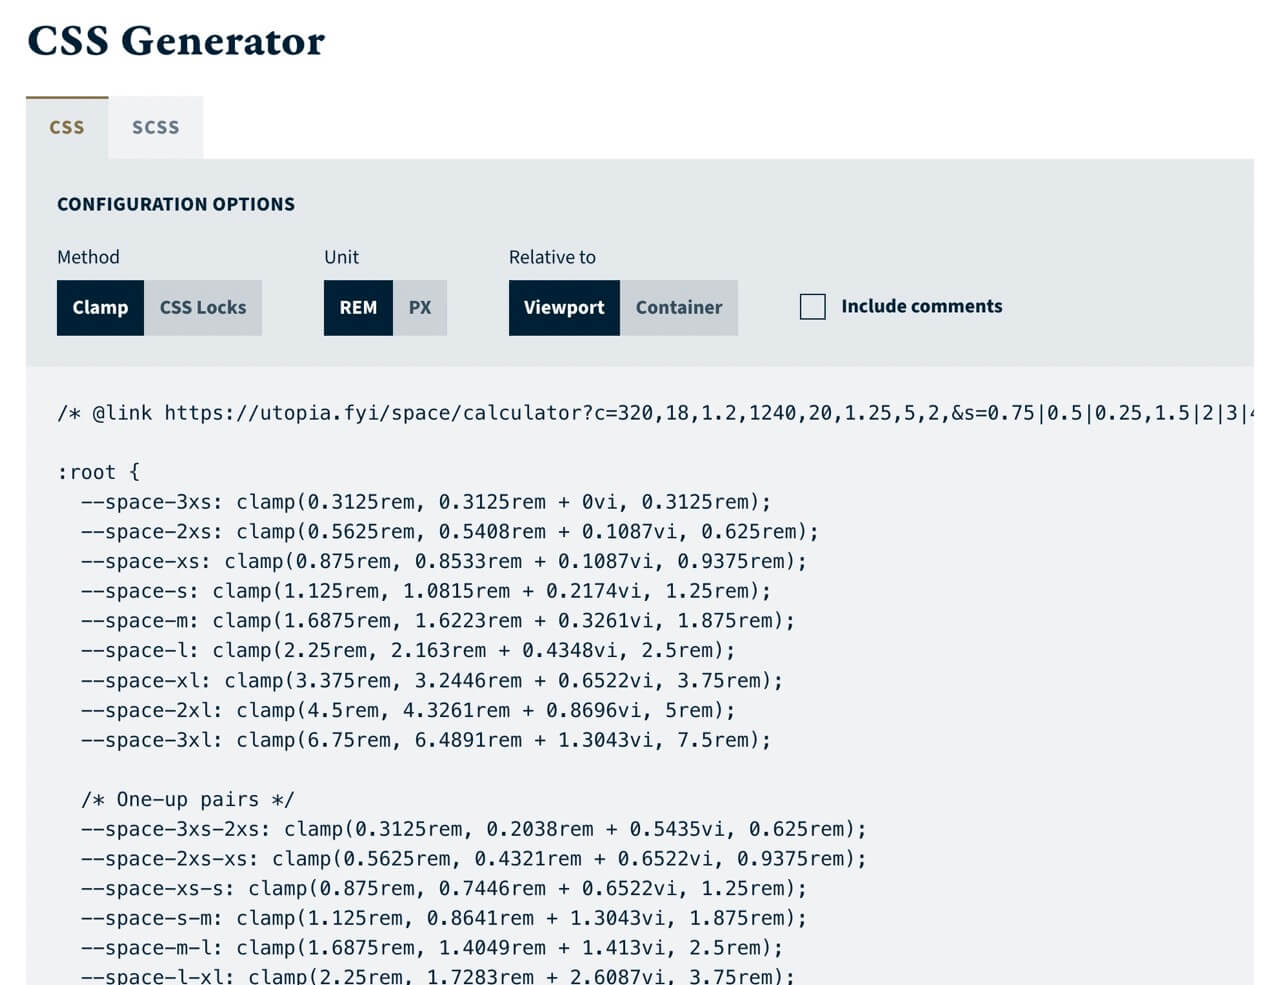 A screenshot of the updated CSS space generator on Utopia.fyi, including CSS/SCSS tabs, a clamp/css locks toggle, a rem/px toggle and a viewport/container toggle